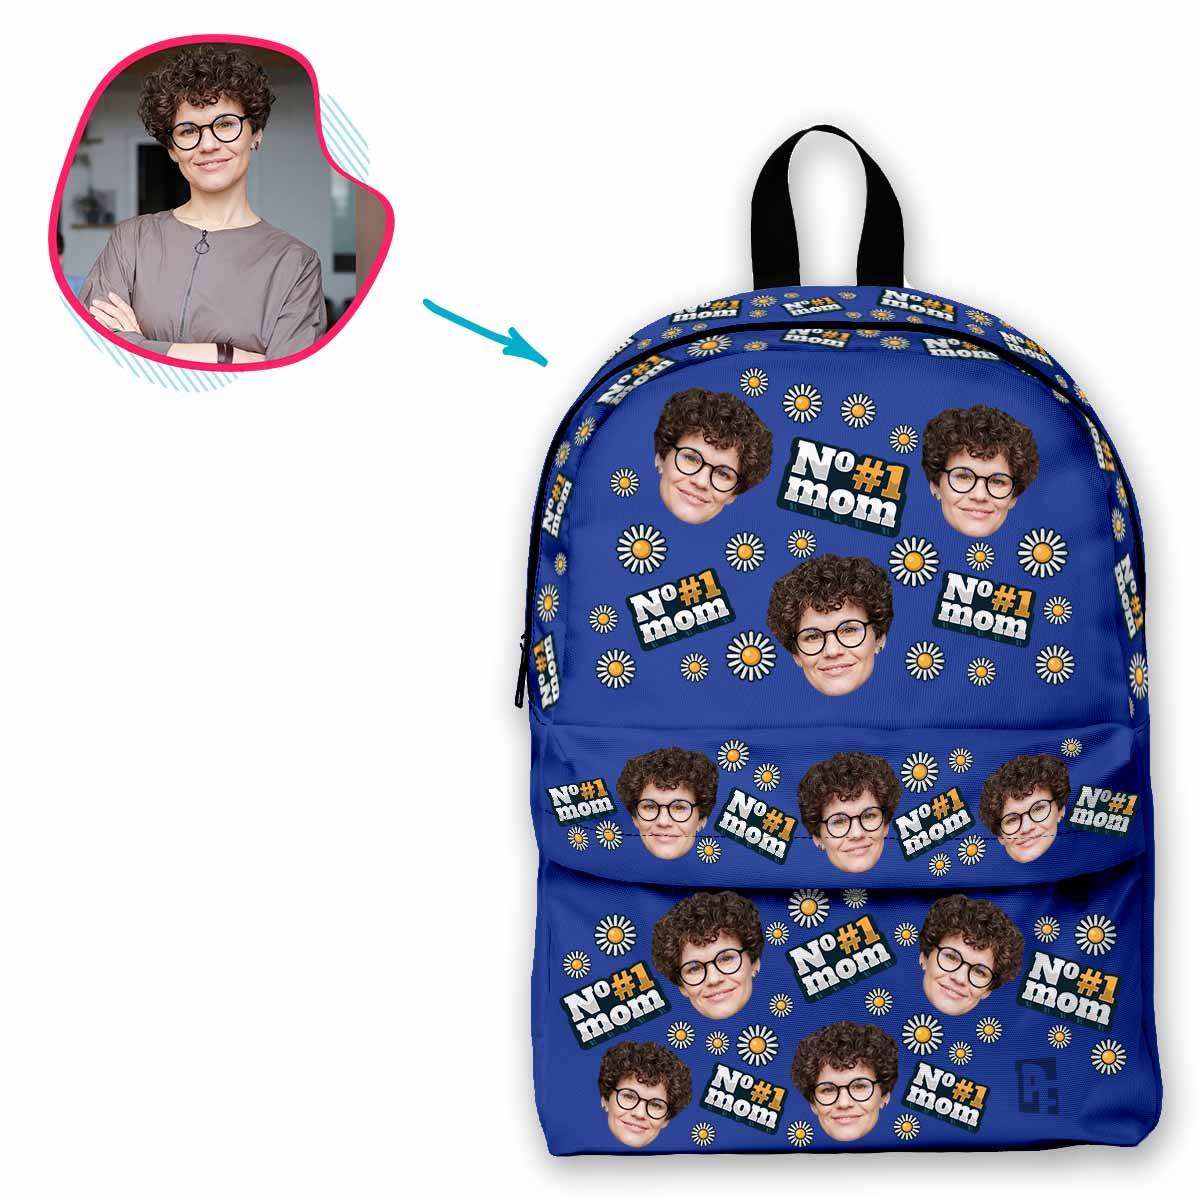 darkblue #1 Mom classic backpack personalized with photo of face printed on it